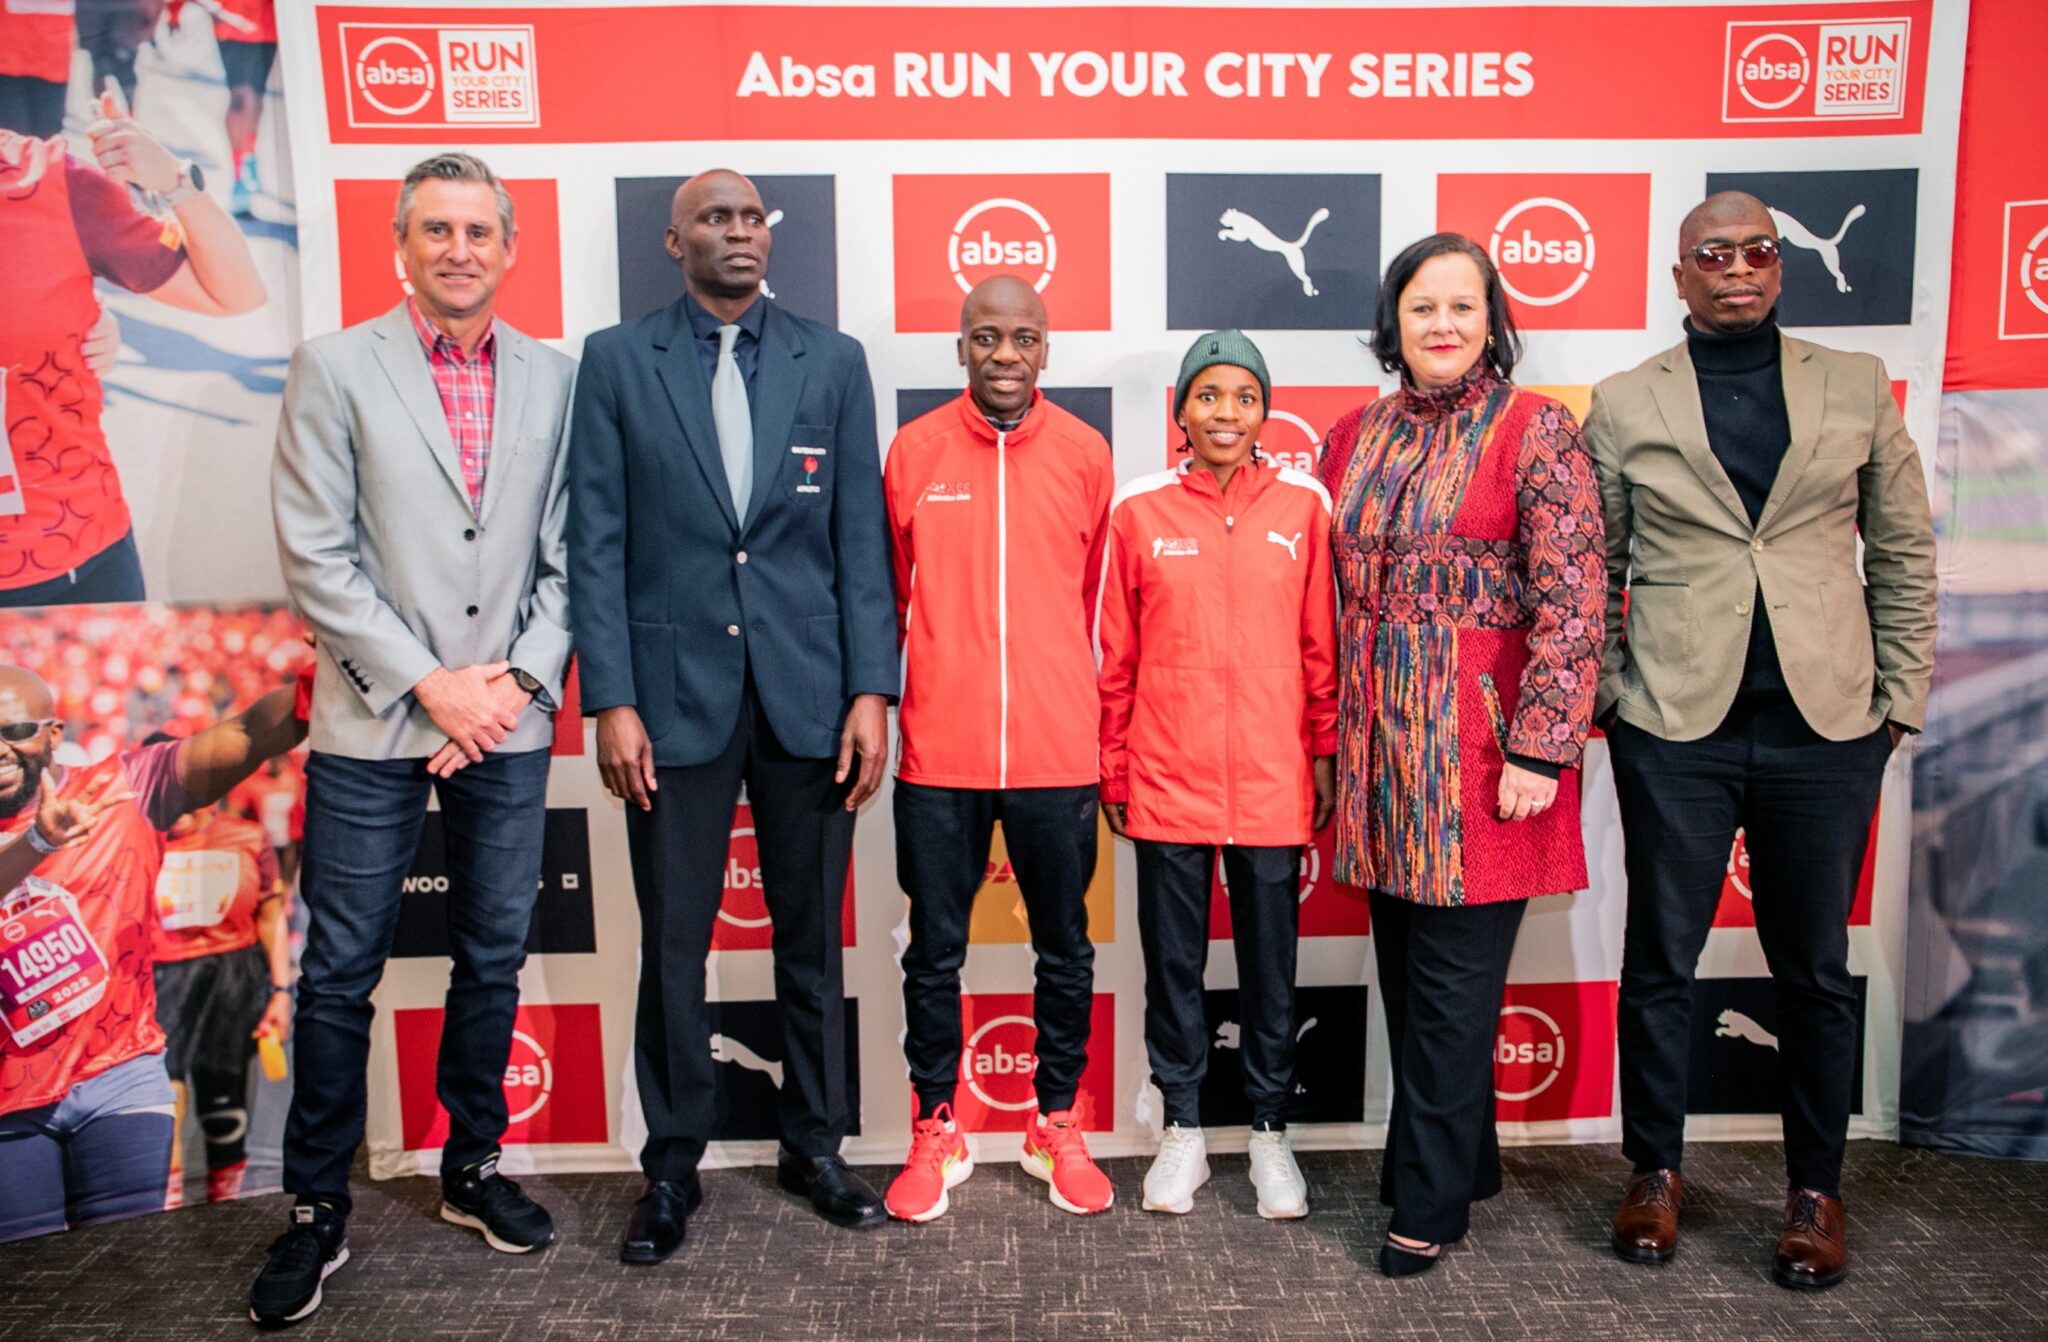 Tshwane 10k added to Absa RUN YOUR CITY Series